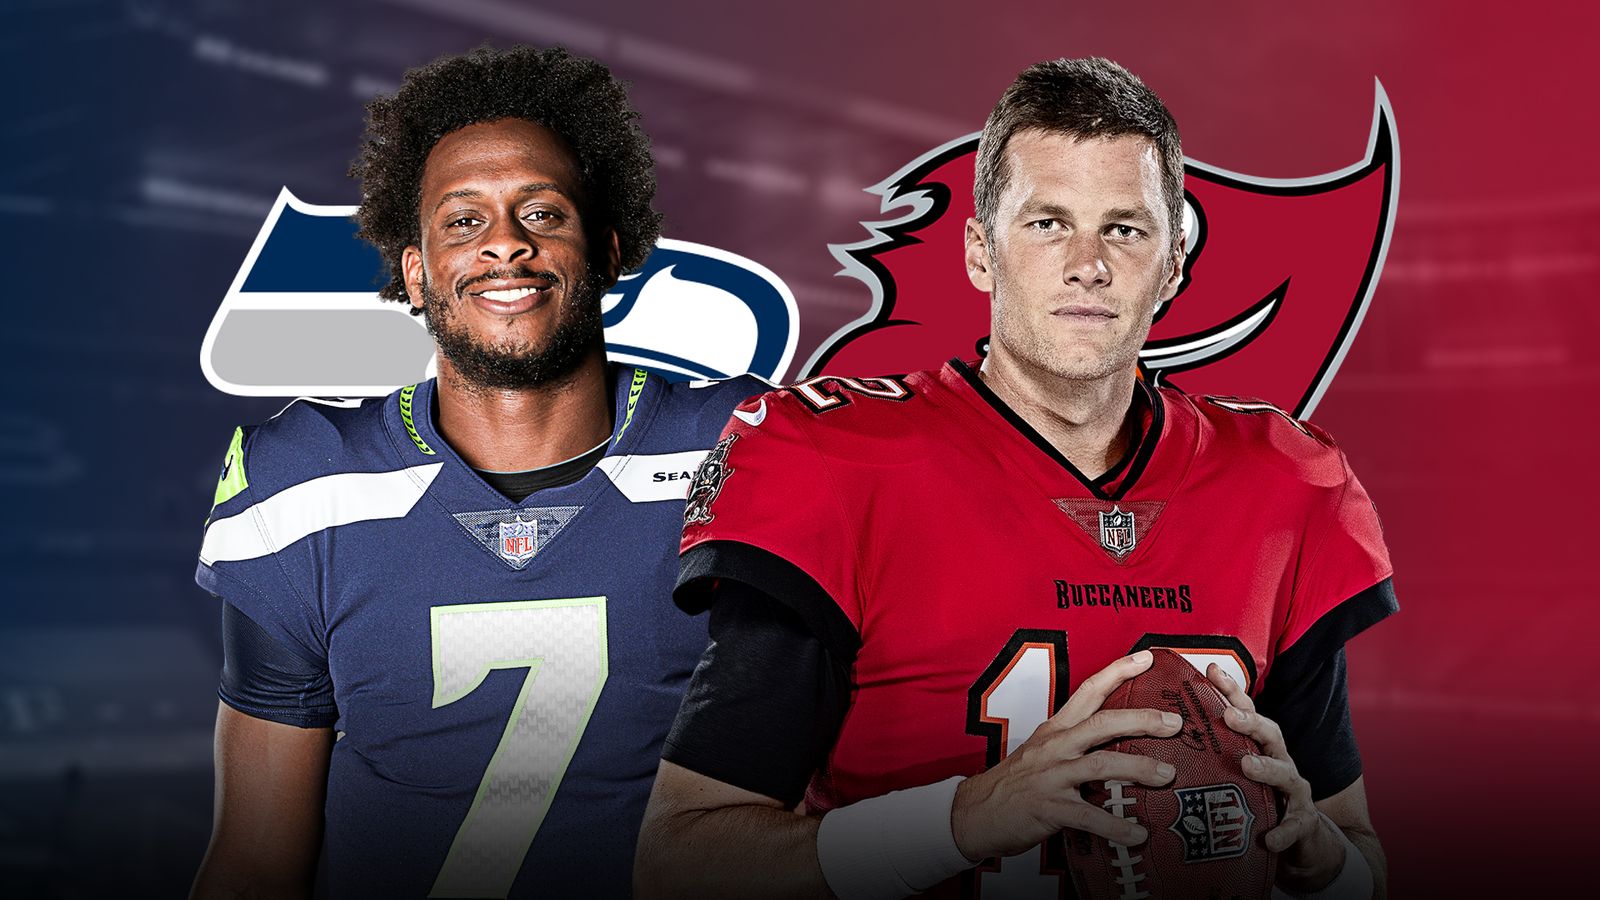 NFL Germany: Tampa Bay Buccaneers face Seattle Seahawks in Munich in latest first for NFL’s global expansion